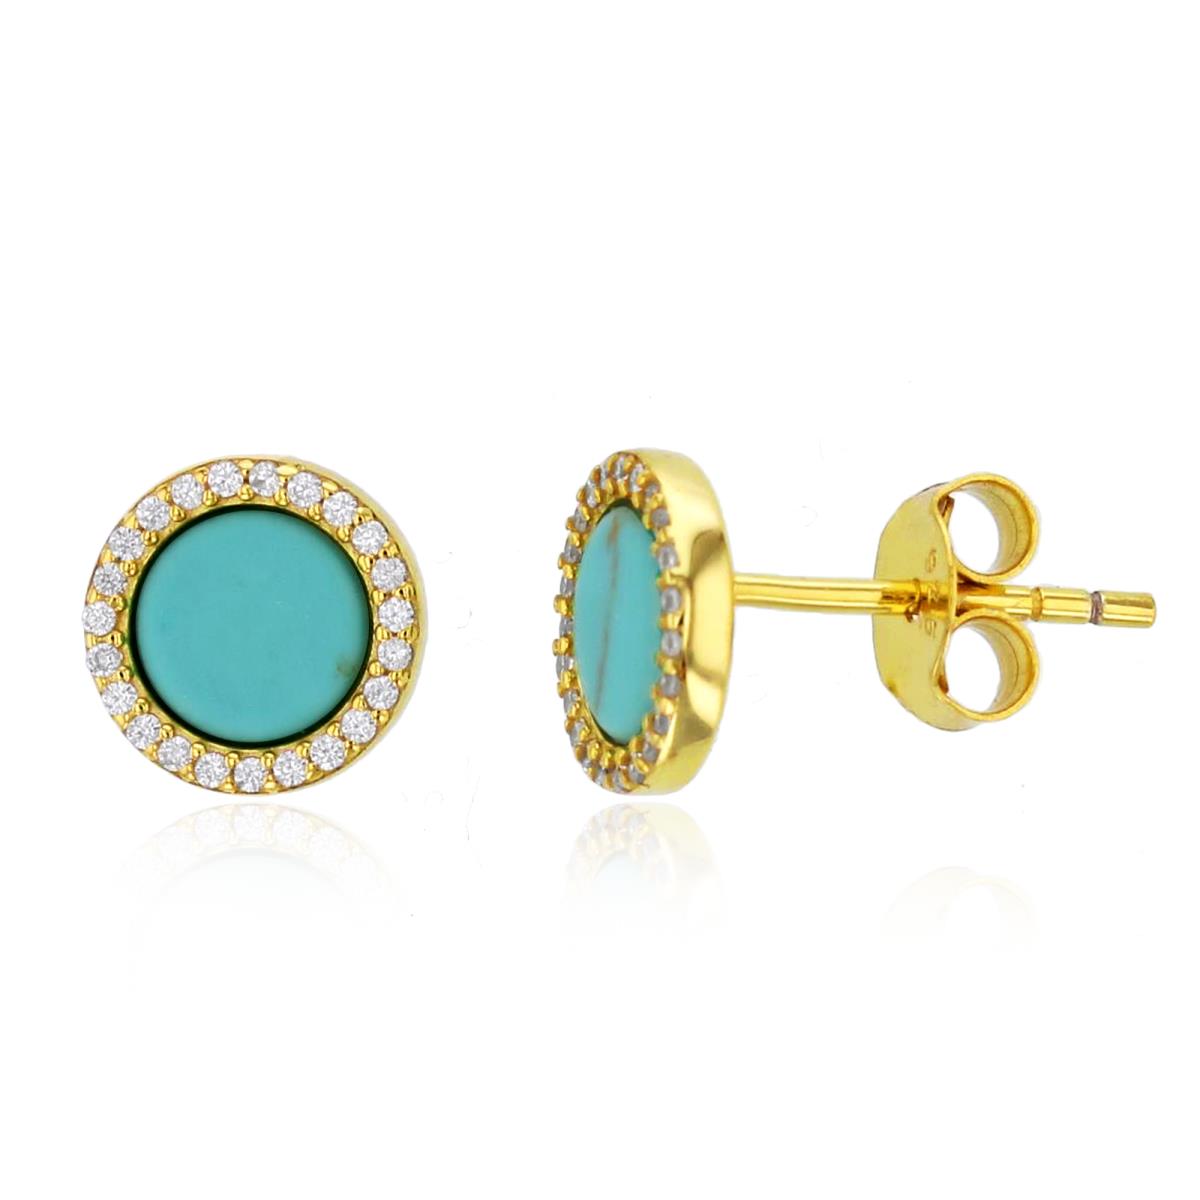 Sterling Silver Yellow 5mm Rnd Turquoise & White CZ Stud Earrings